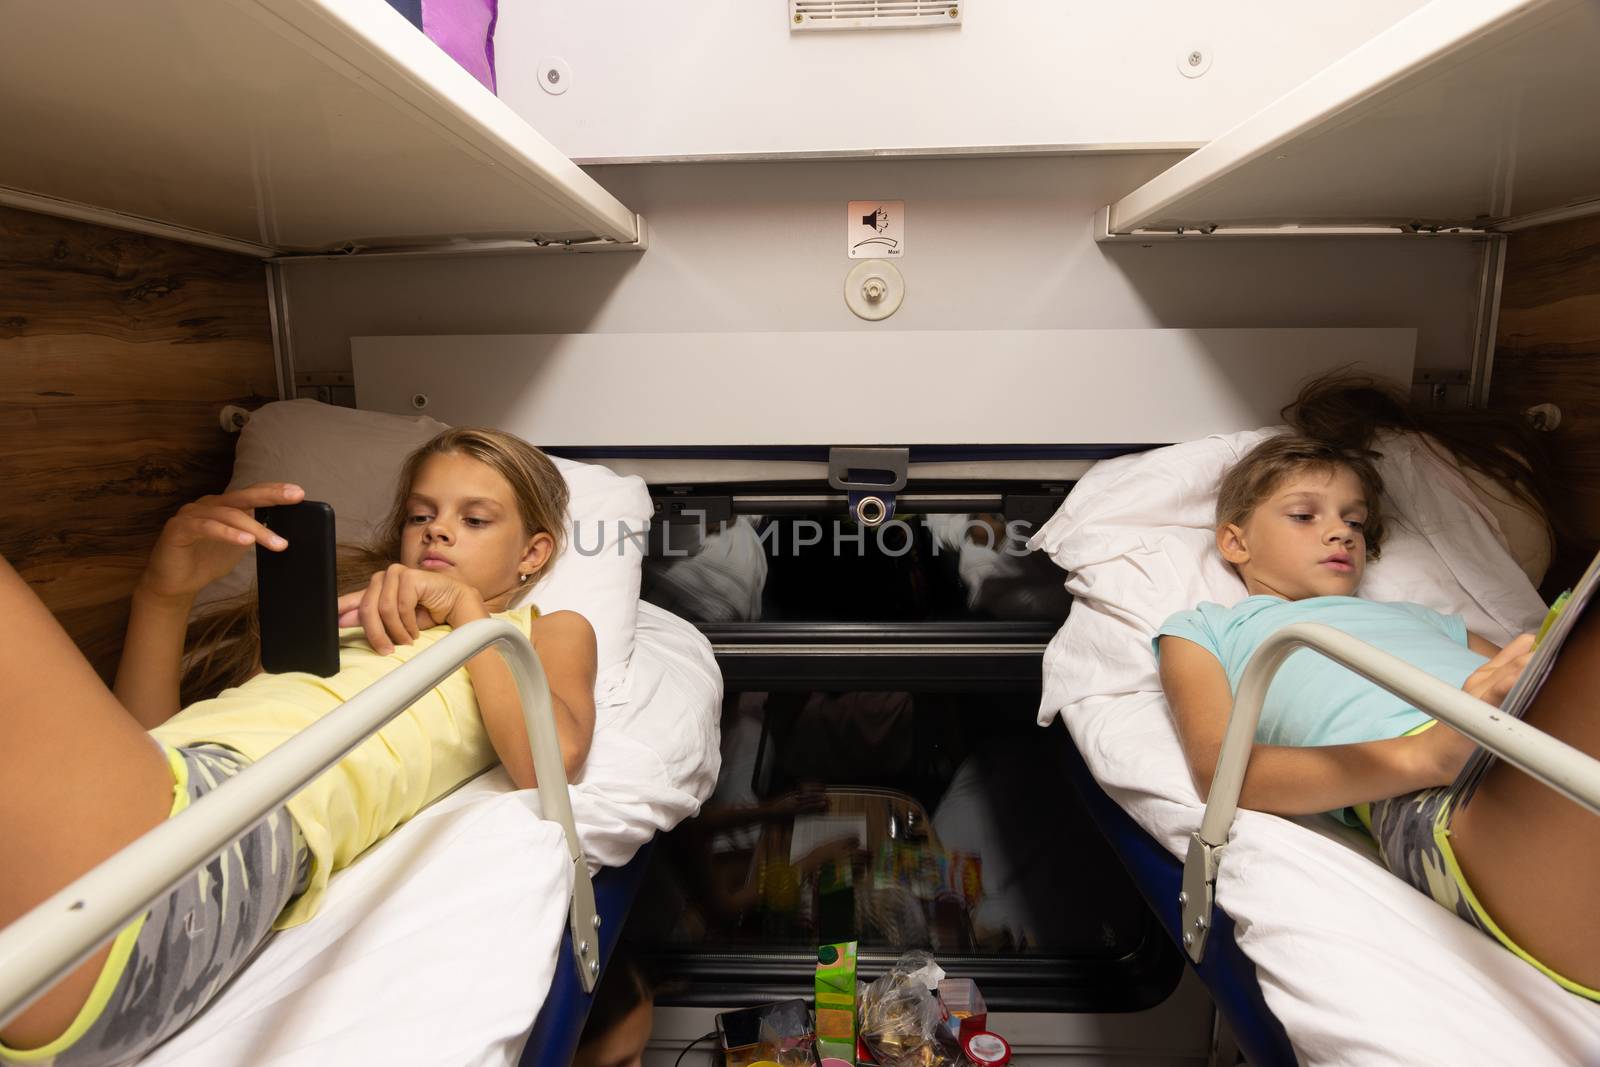 Children on the upper shelves of a reserved seat car do different activities